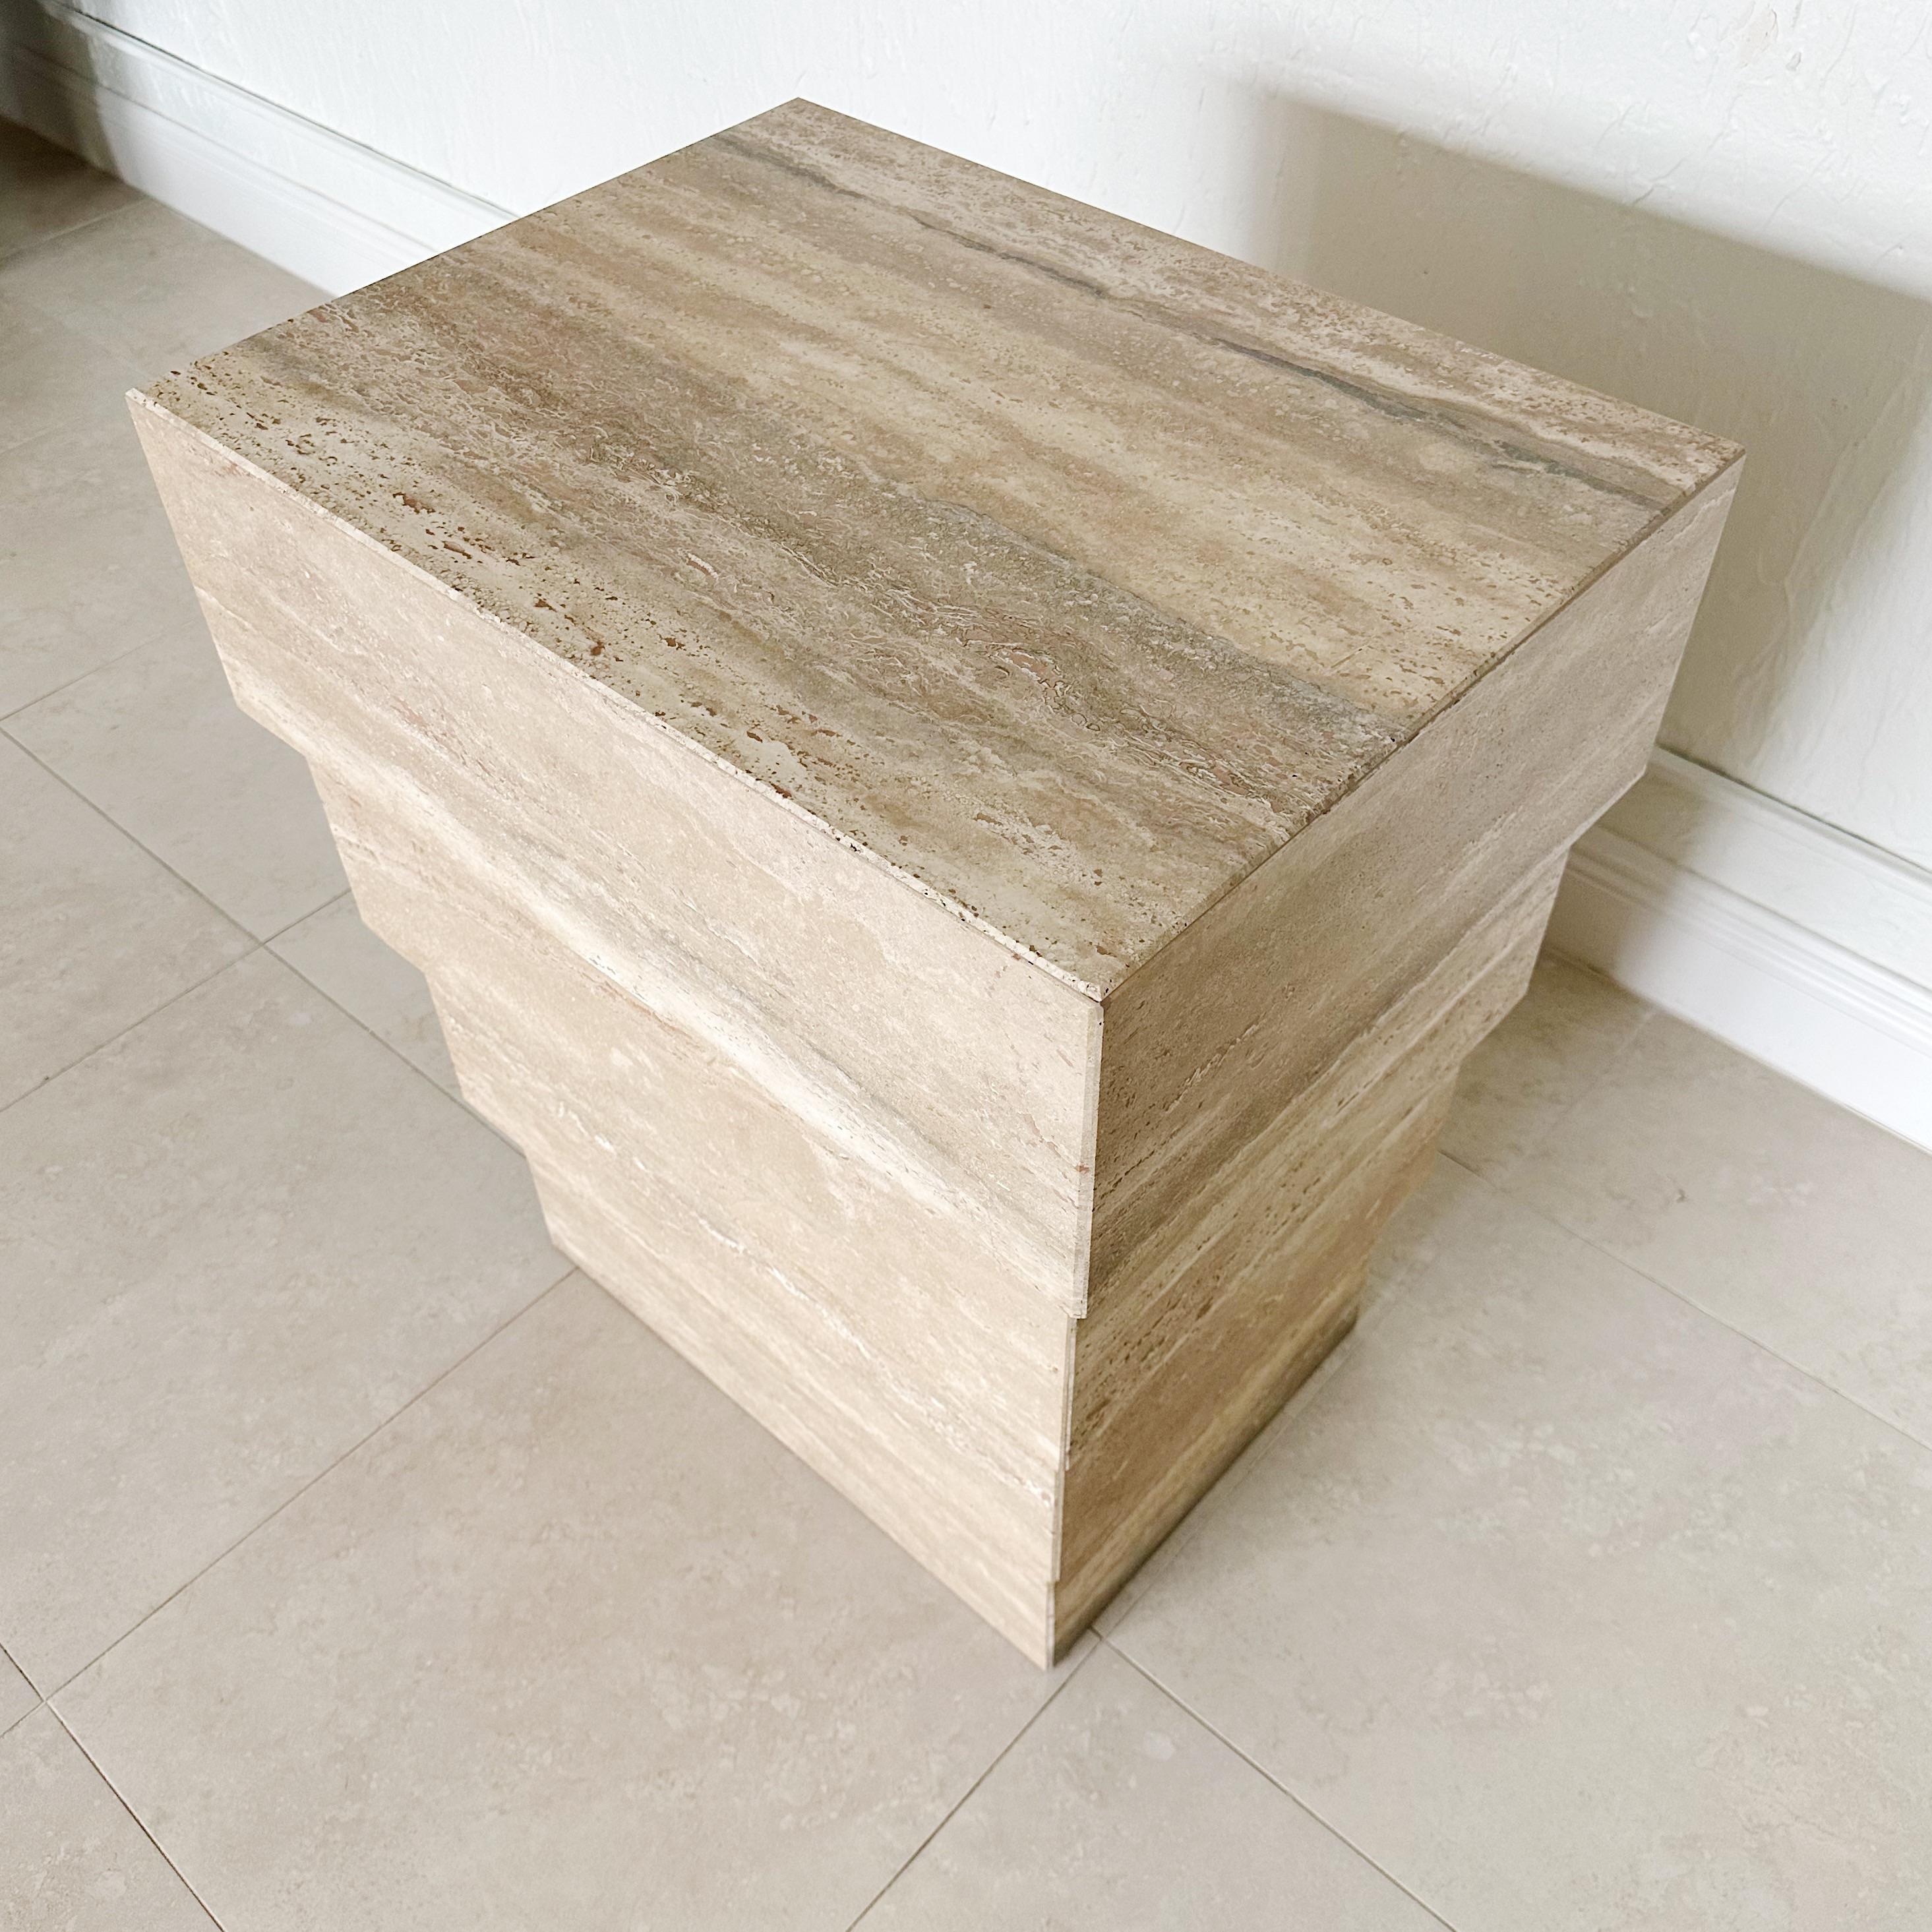 Late 20th Century Stepped Vintage Honed Italian Travertine Marble Pedestal Table Base